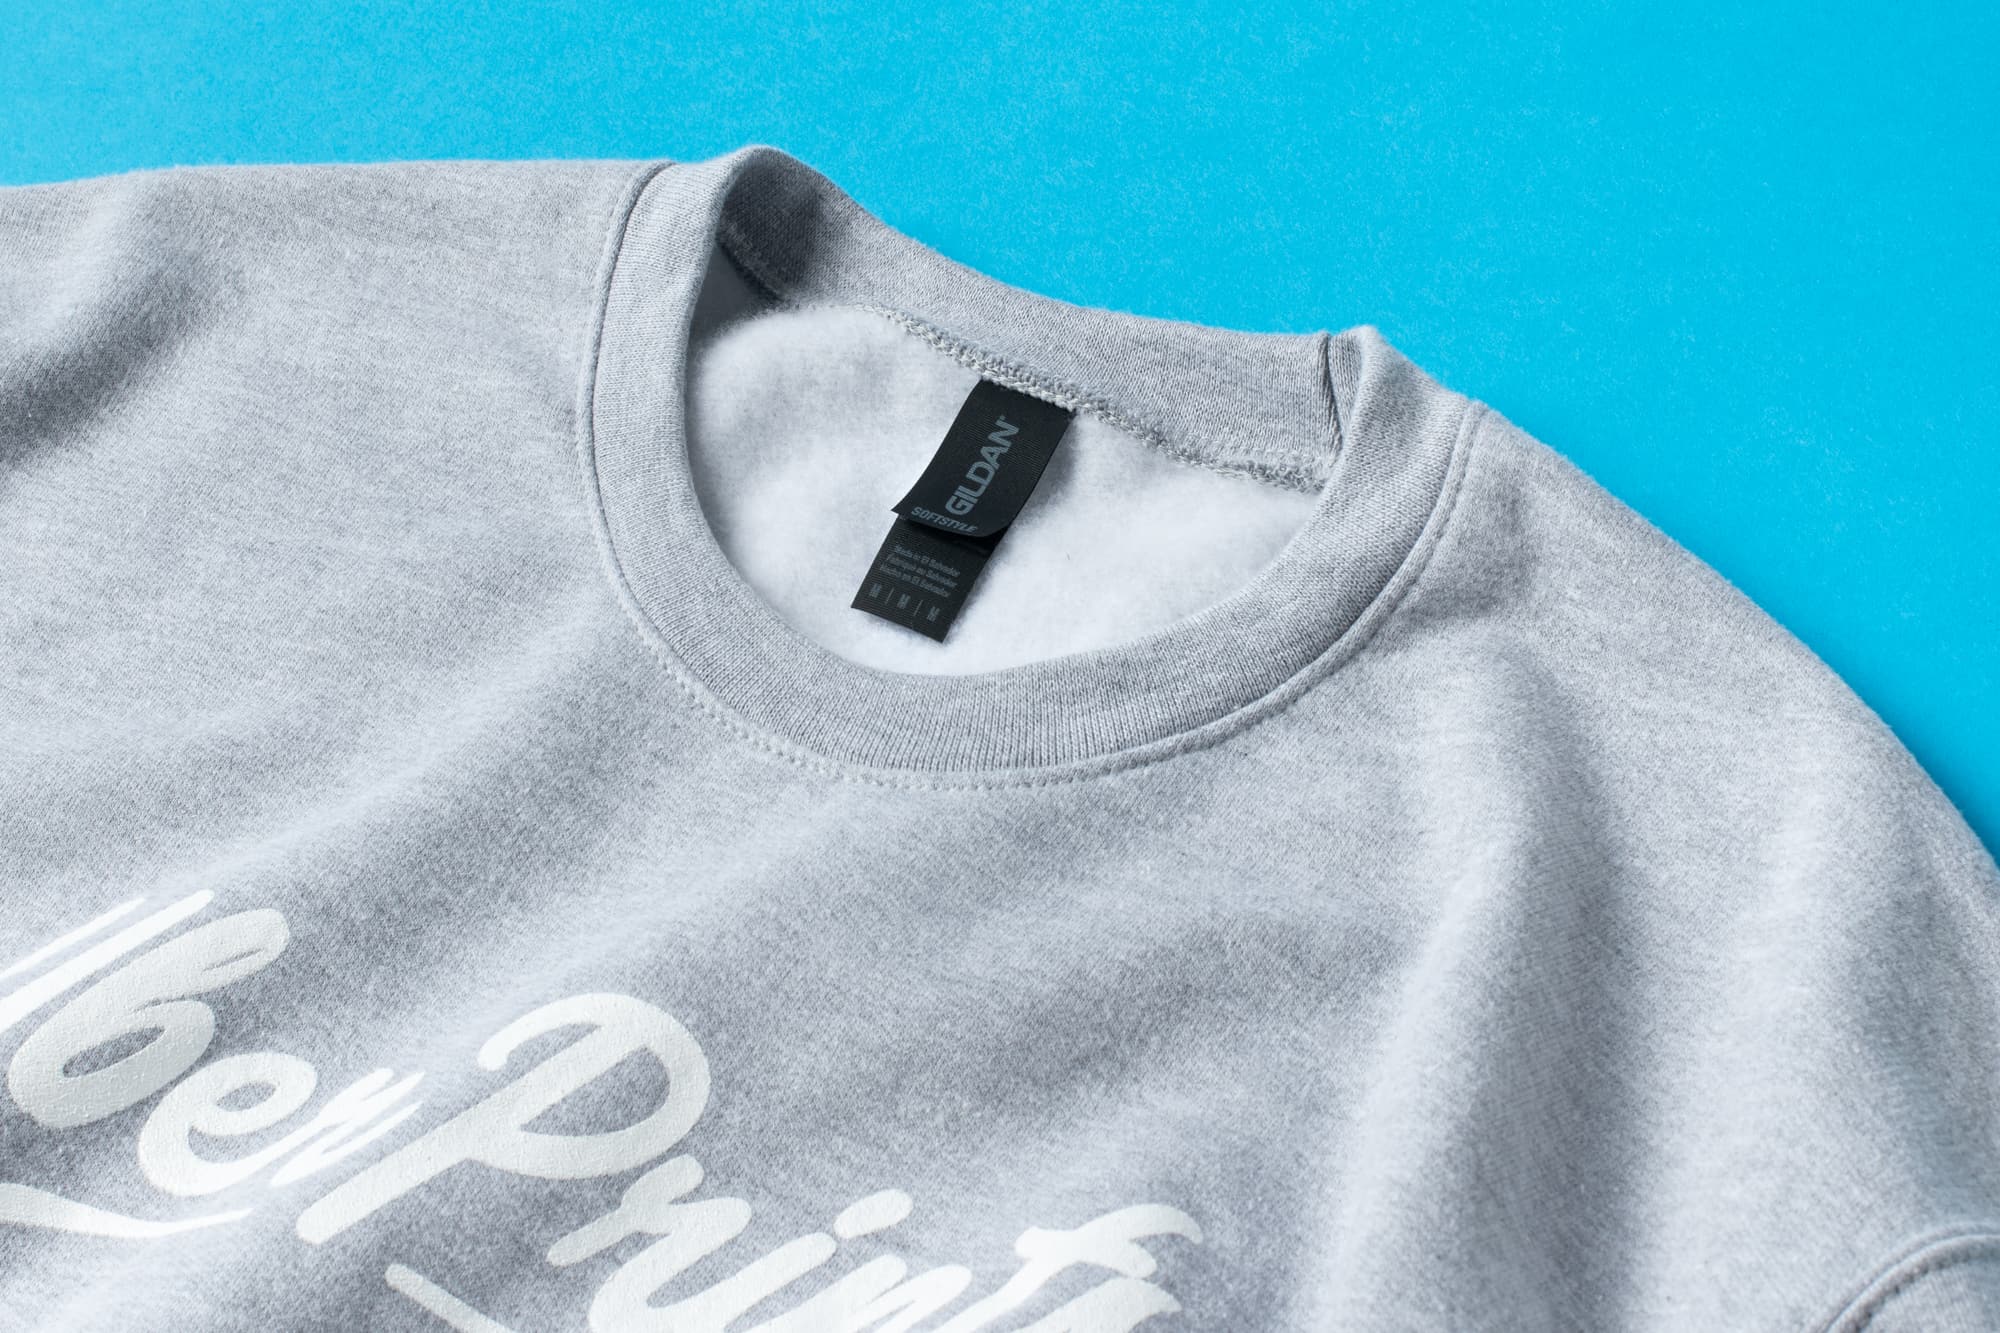 Detail of the Basic Crewneck's collar and tag to show material